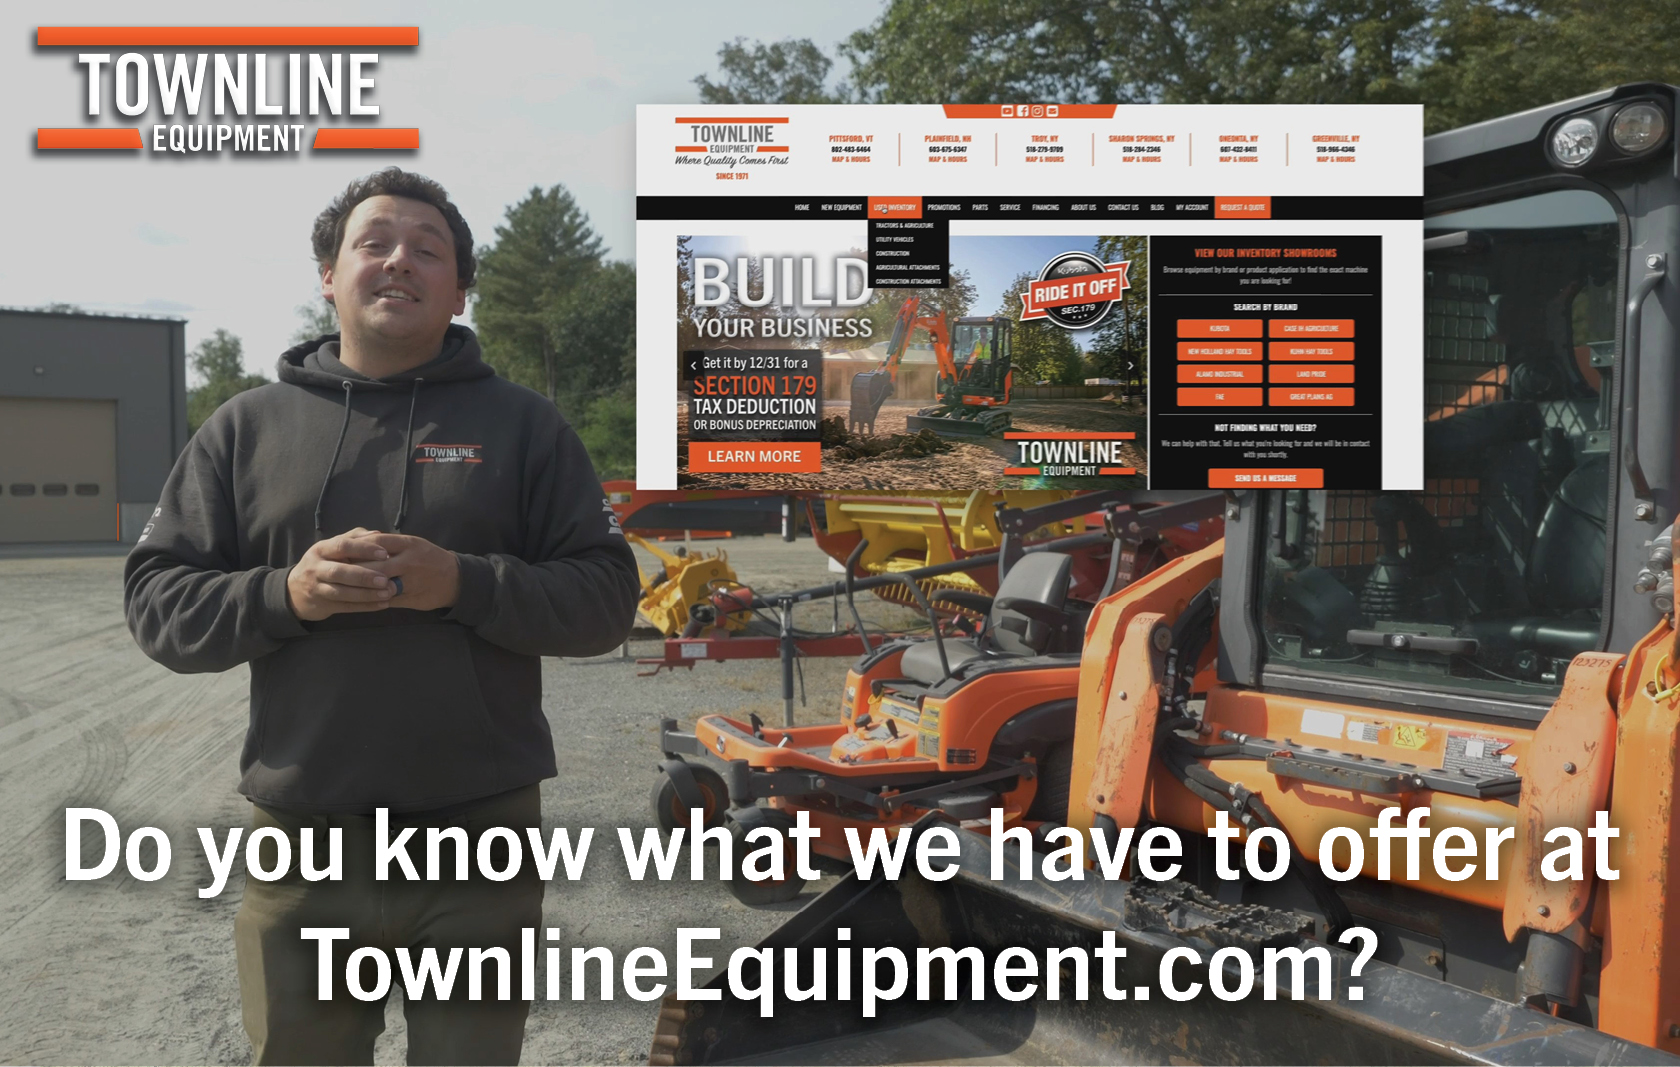 What Townlineequipment.com has to offer